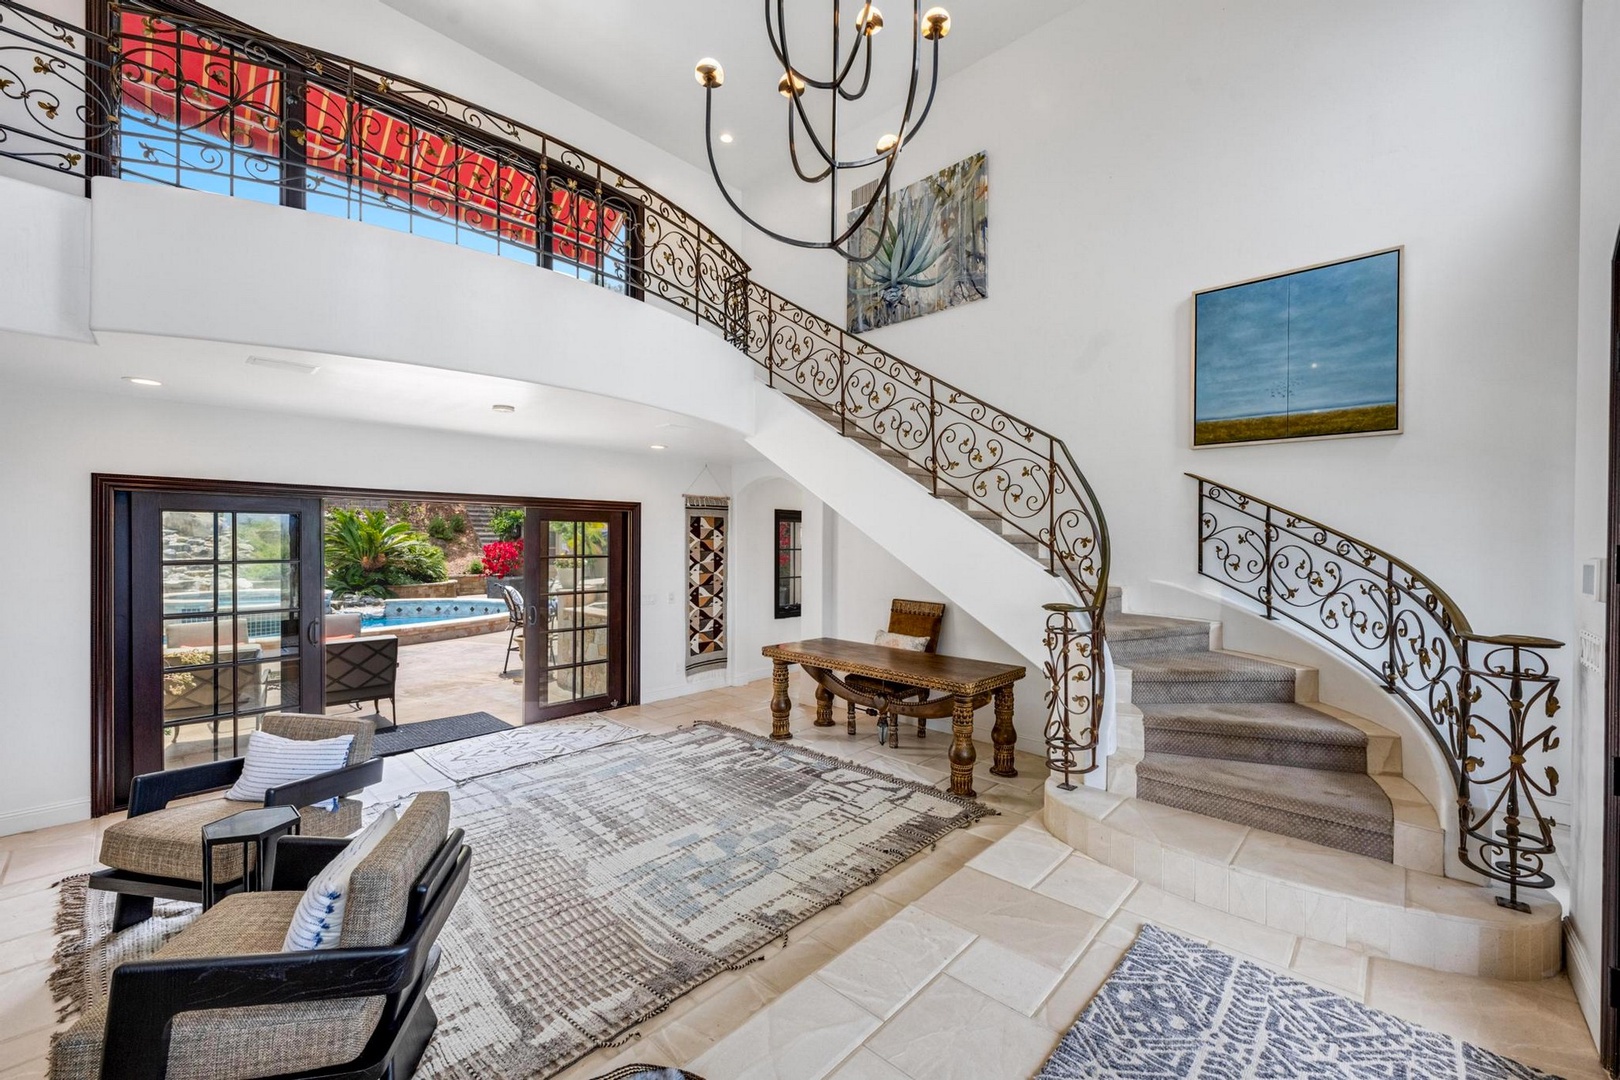 Entry foyer leads to the swimming pool